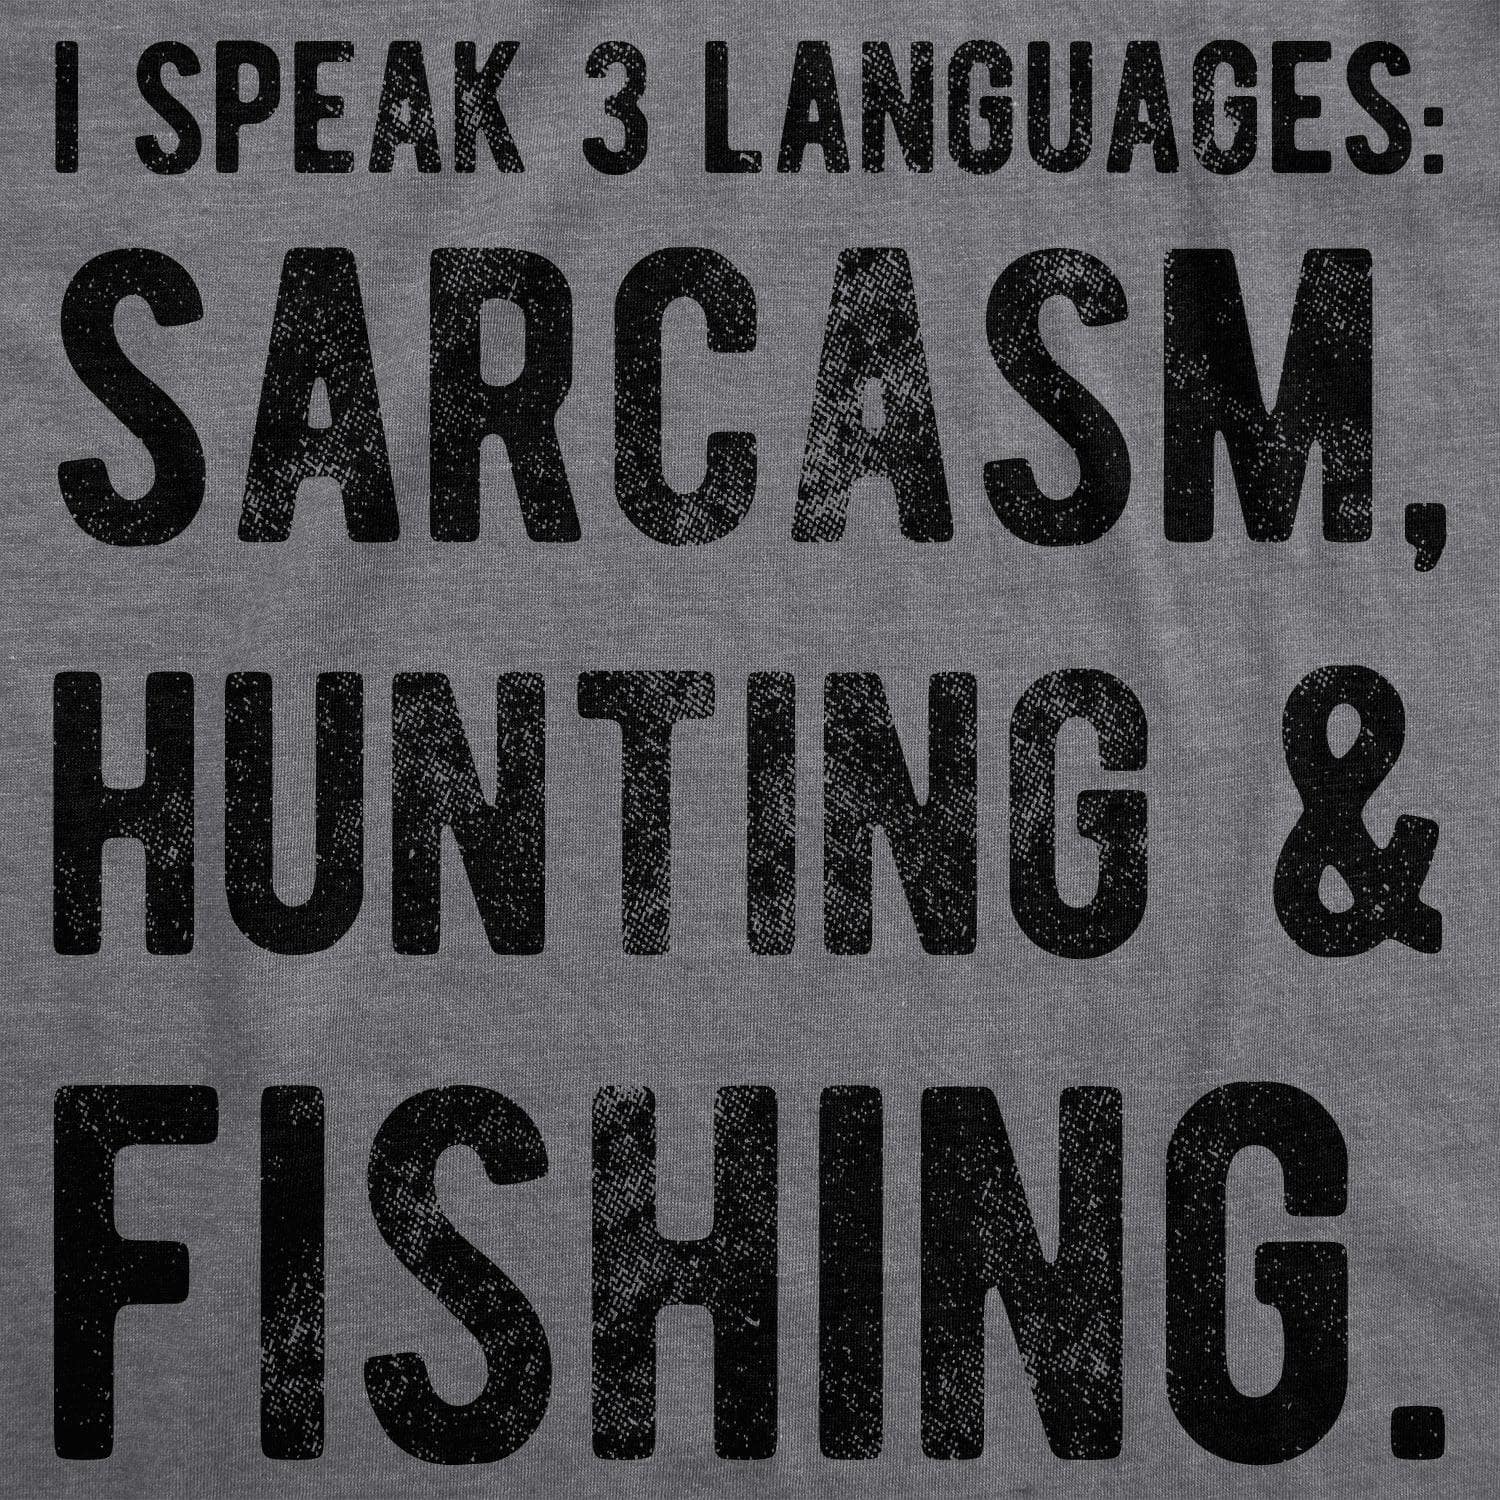 I Like Hunting And Maybe 3 People Men's T Shirt - Crazy Dog T-Shirts